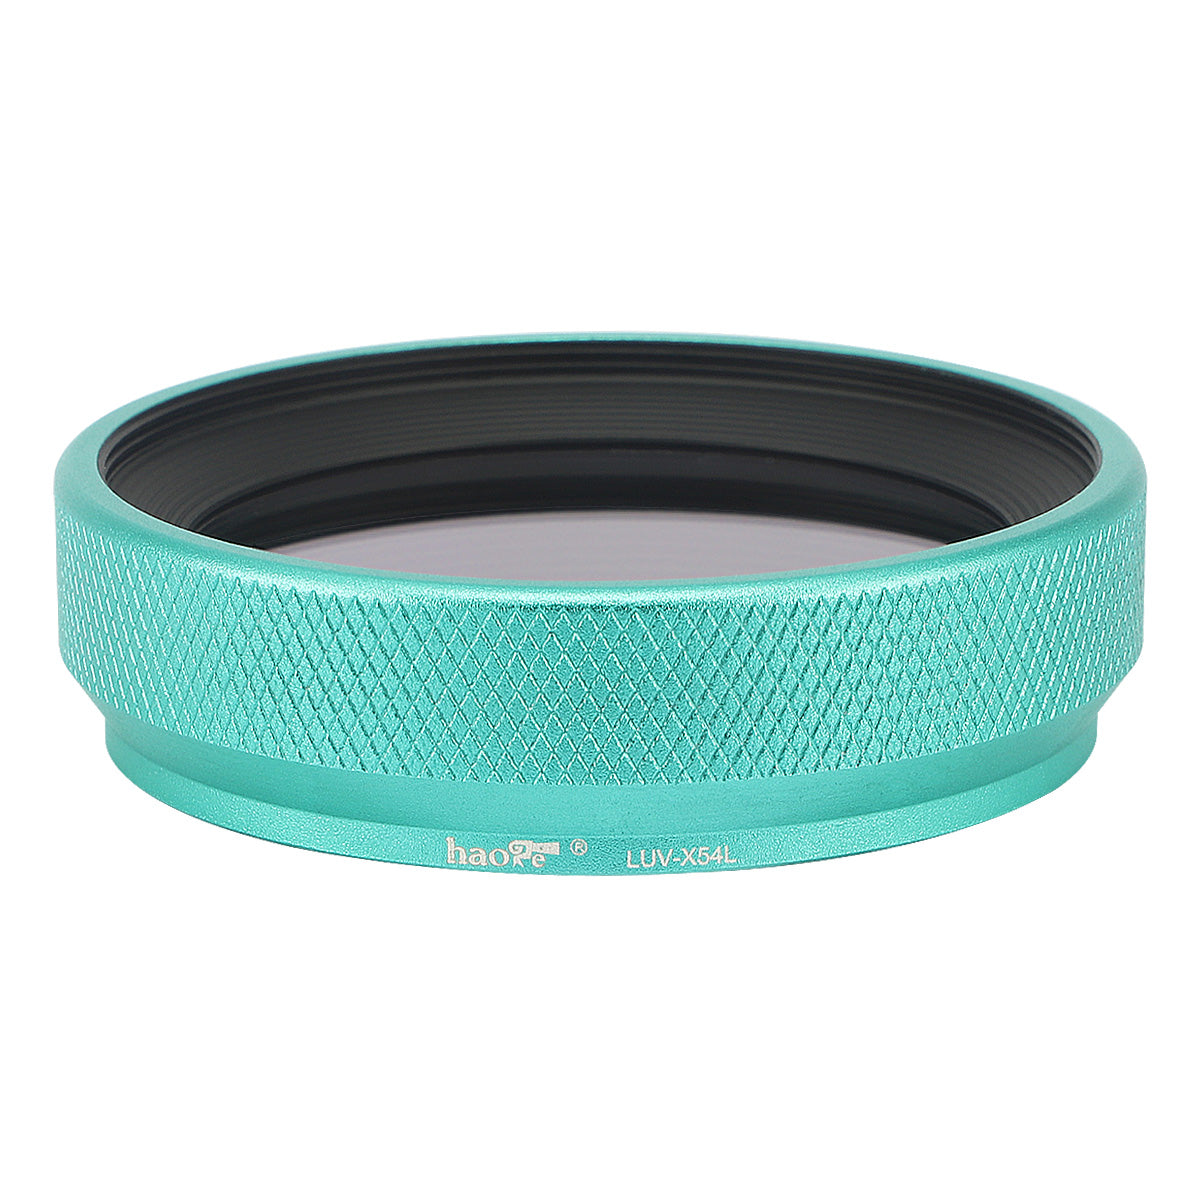 Haoge LUV-X54L Metal Lens Hood with MC UV Protection Multicoated Ultraviolet Lens Filter for Fujifilm Fuji X100V Camera Green